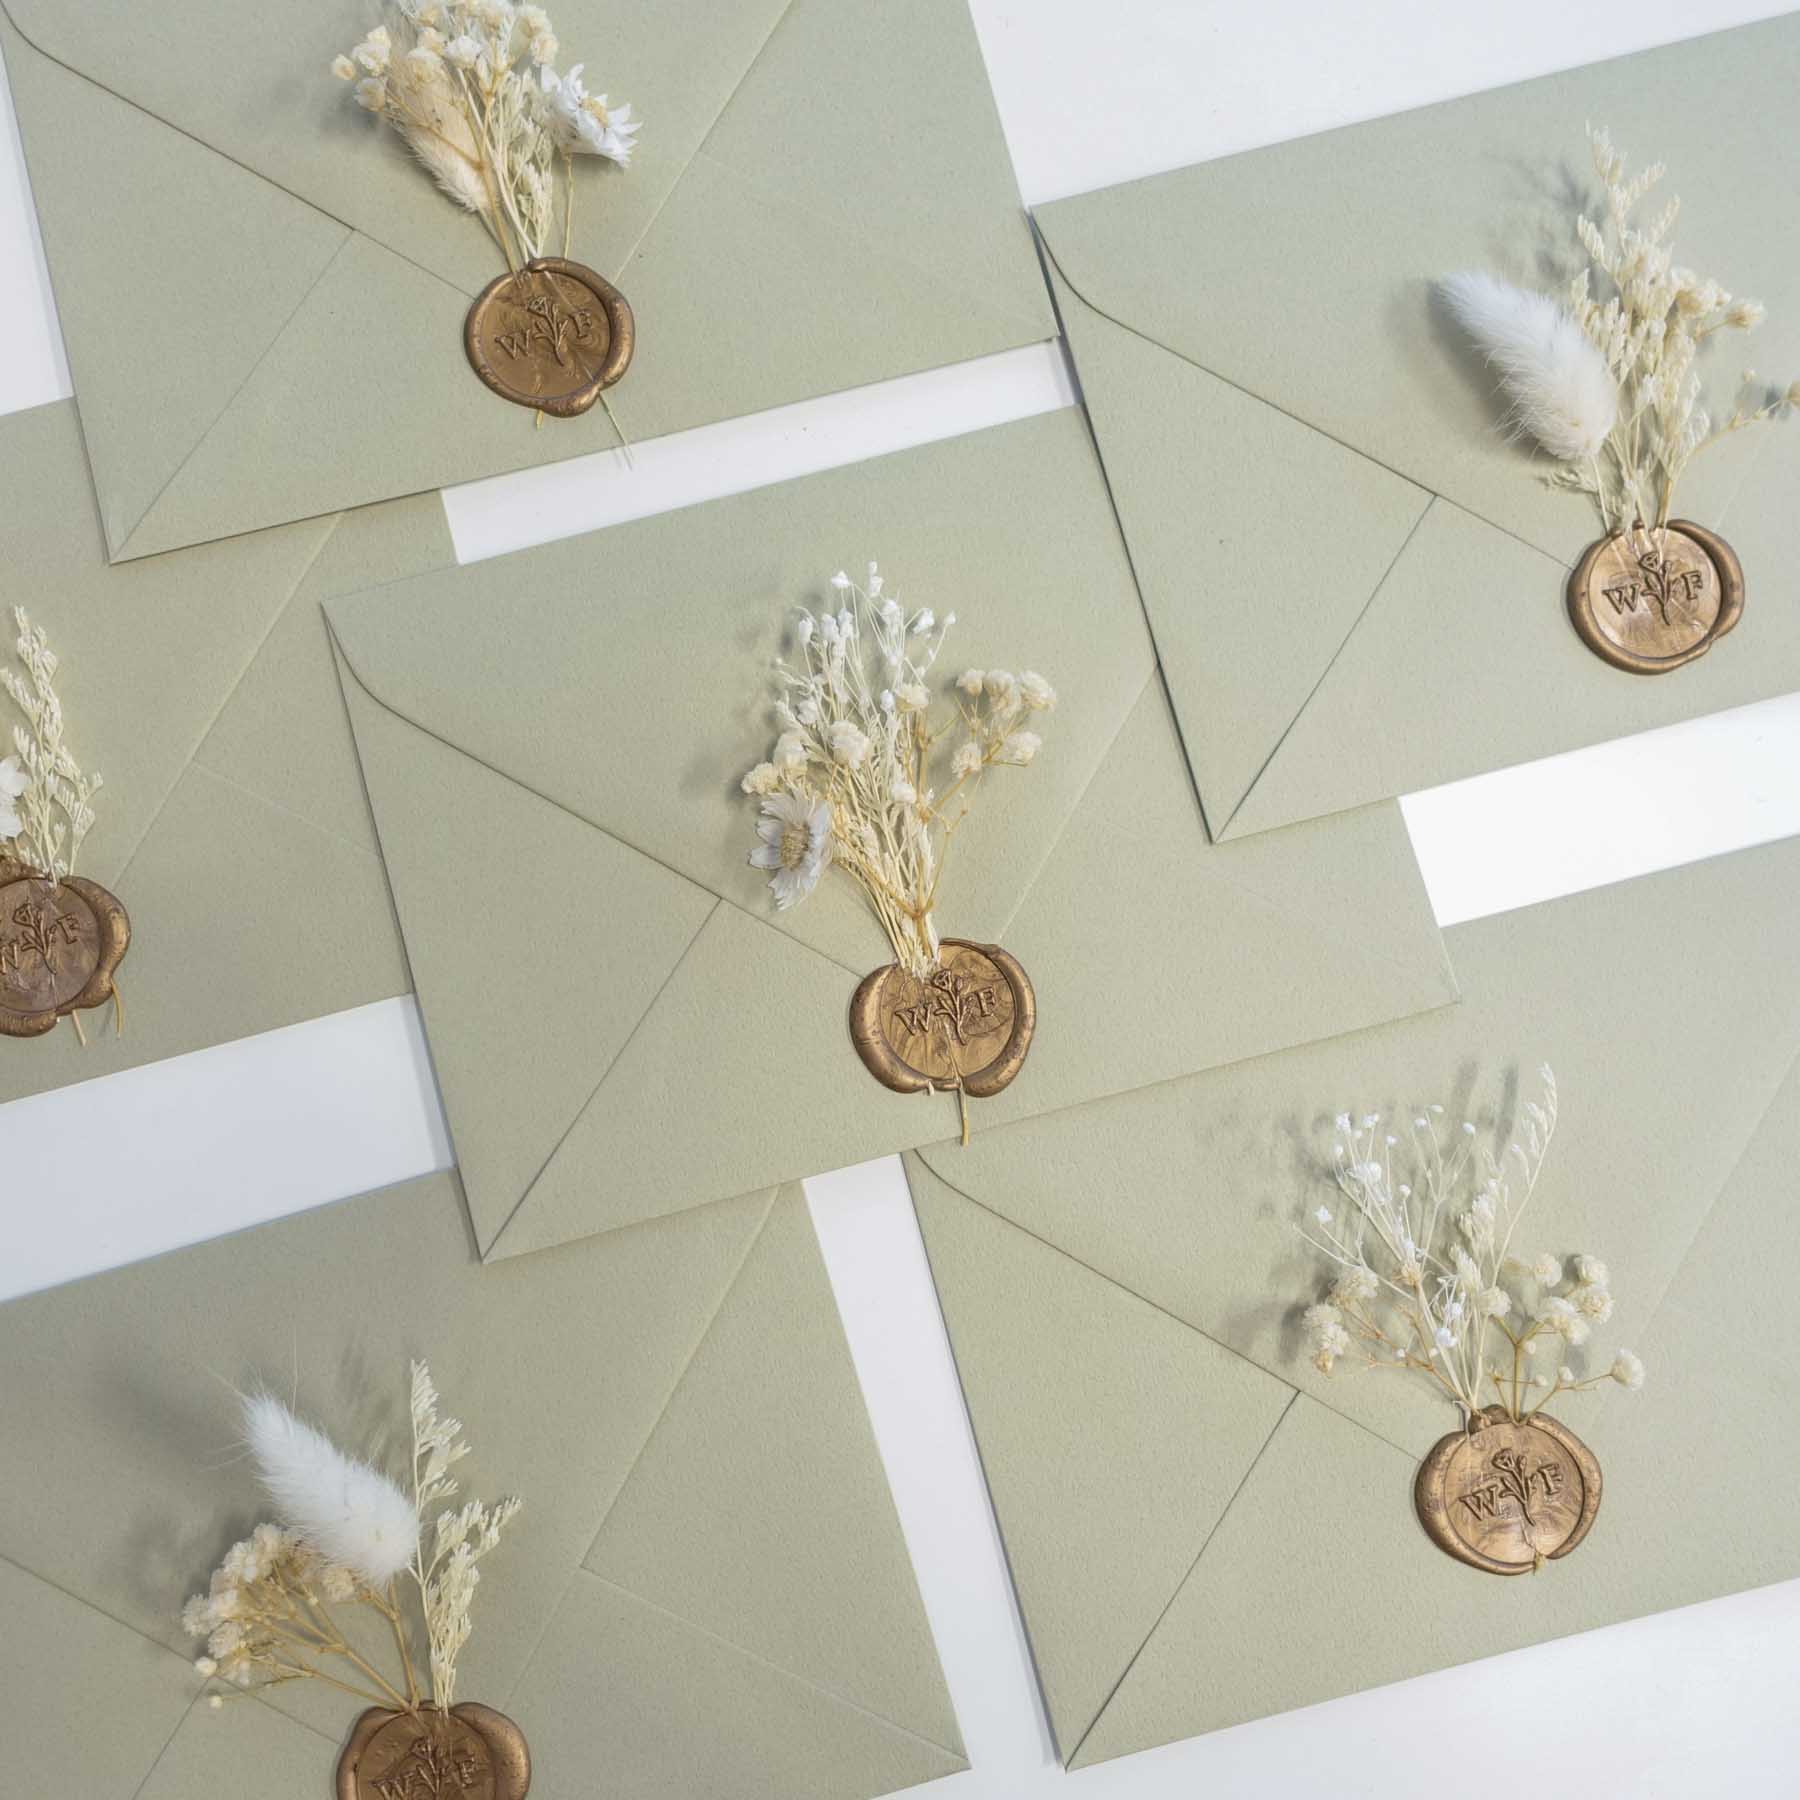 Loose Dried Flower Bunches - Rustic Neutrals Mix for wedding envelope invitations and wax seals australia